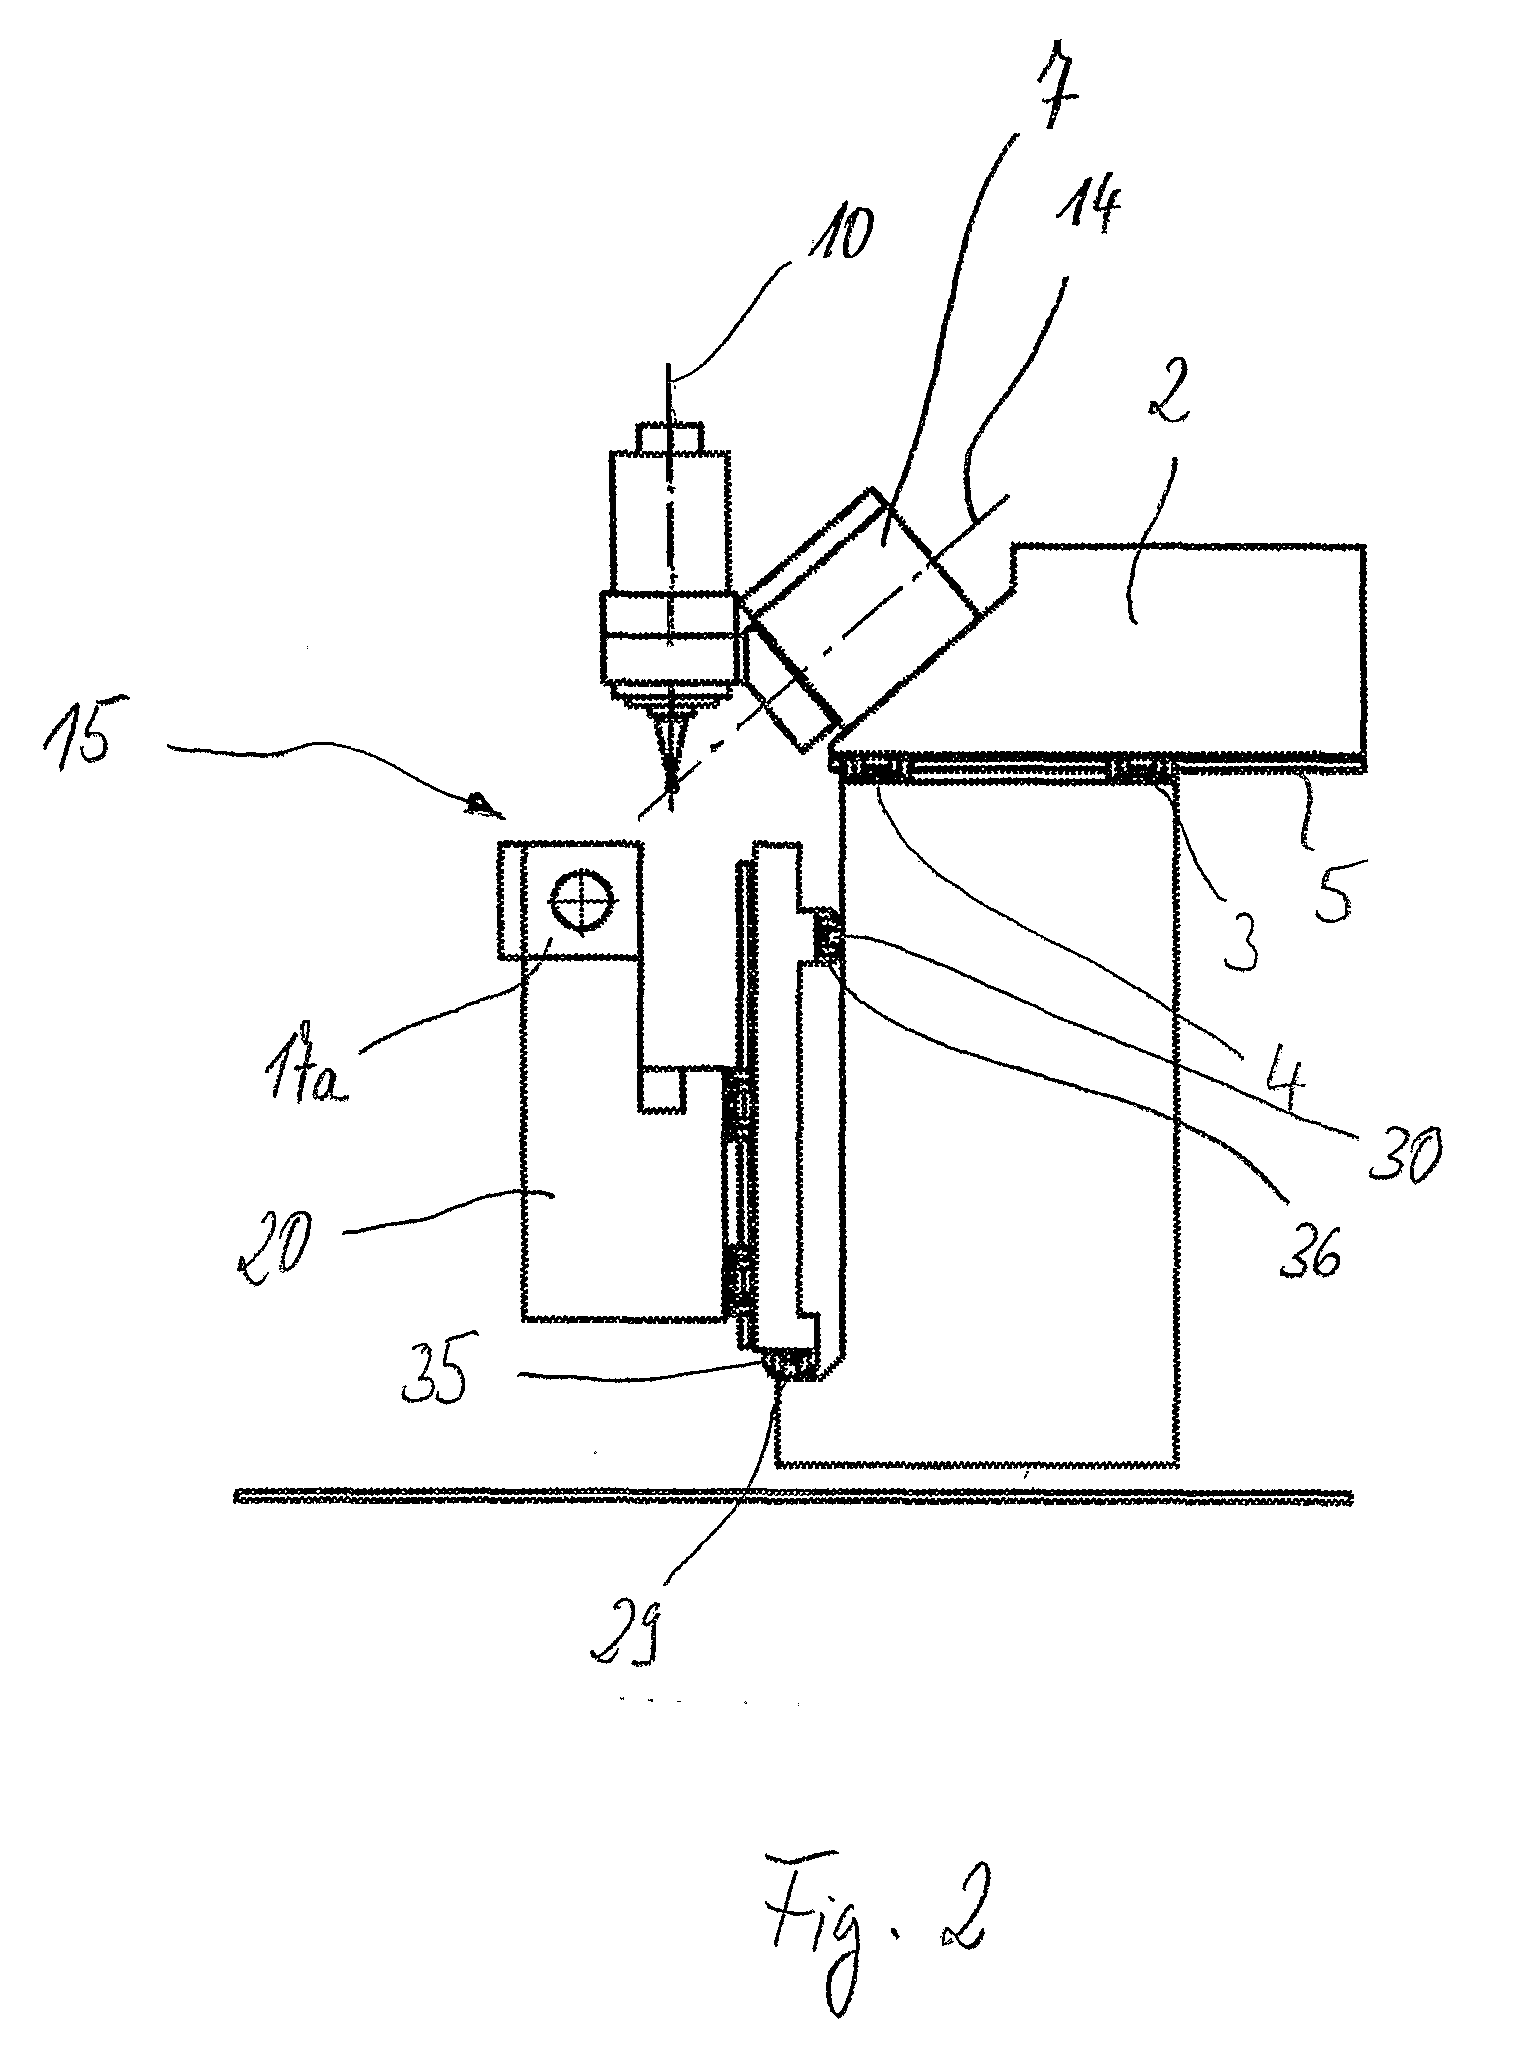 Machine Tool with Two Clamp Points on Separate Carriages